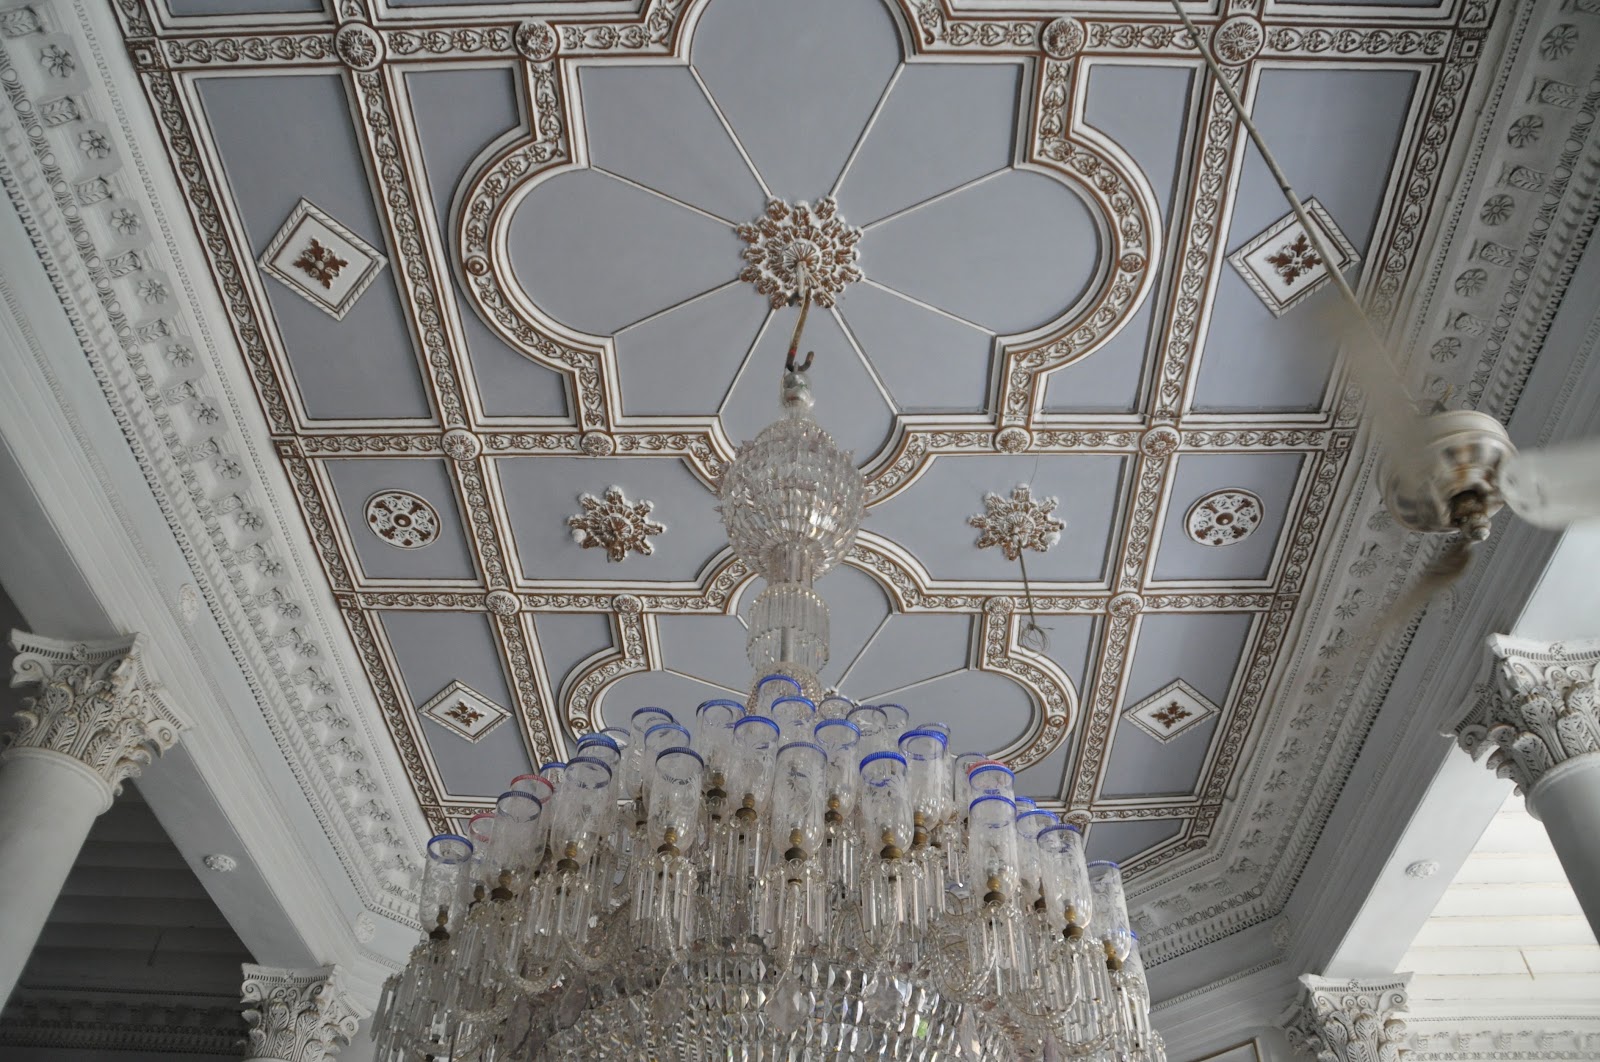 More Chandeliers and Ceilings in Incredible India title=